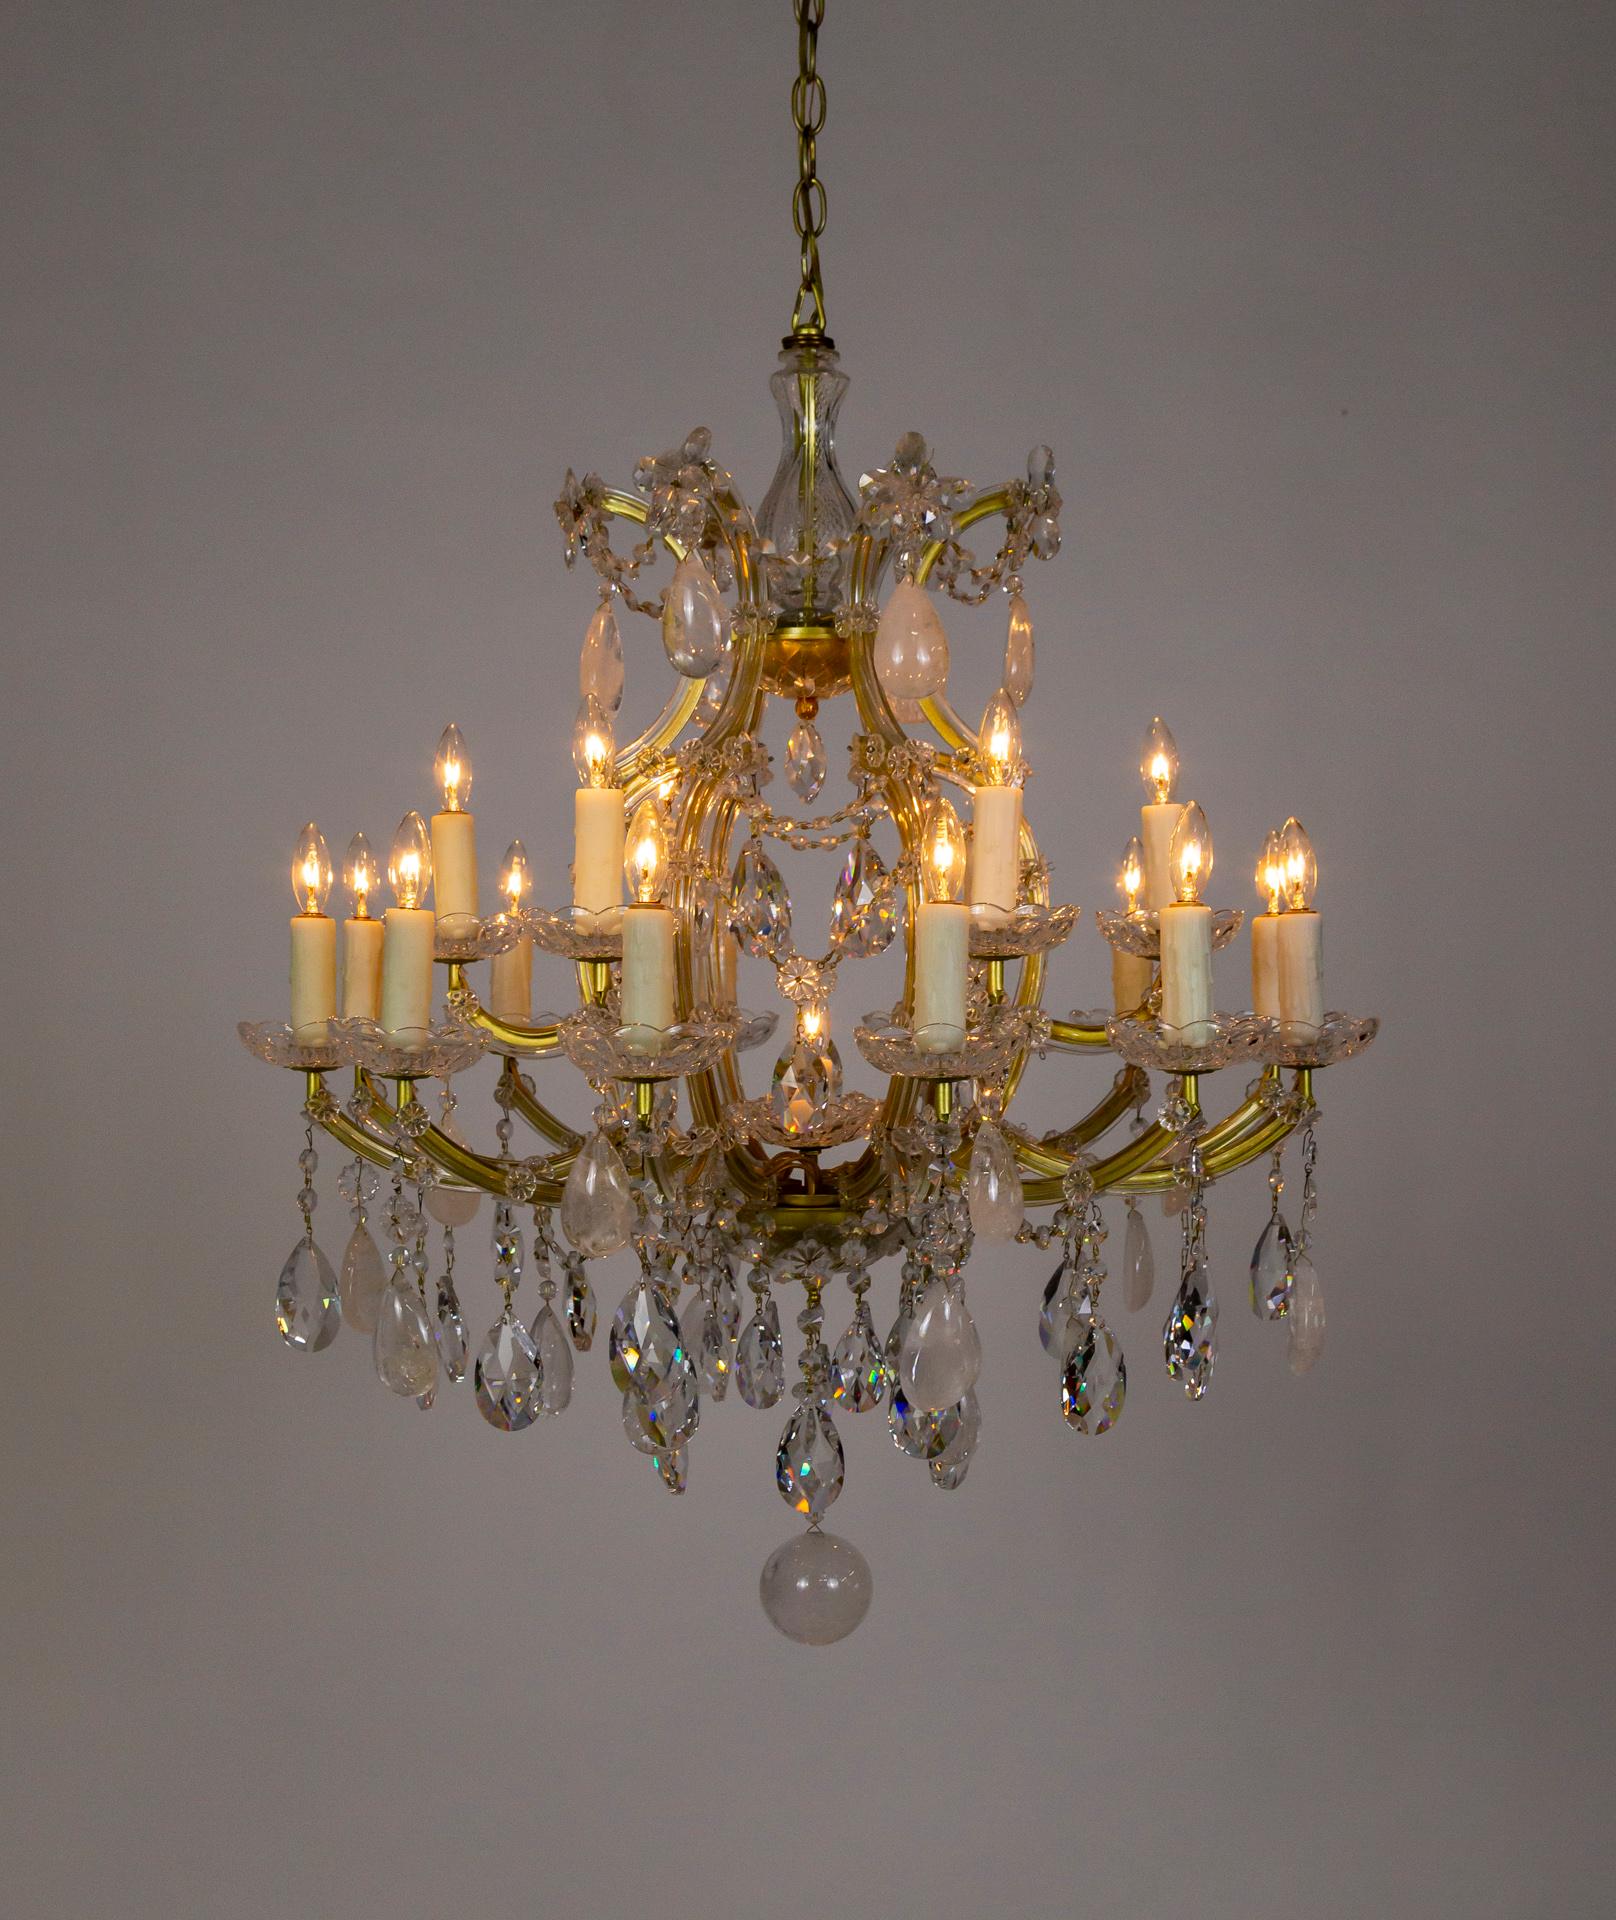 A large, Maria Theresa style chandelier from the later 20th century decked with large rock crystals and highly prismatic, cut, leaded crystals. It has 18 arms in two tiers and one center light that illuminate the crystals beautifully. It has